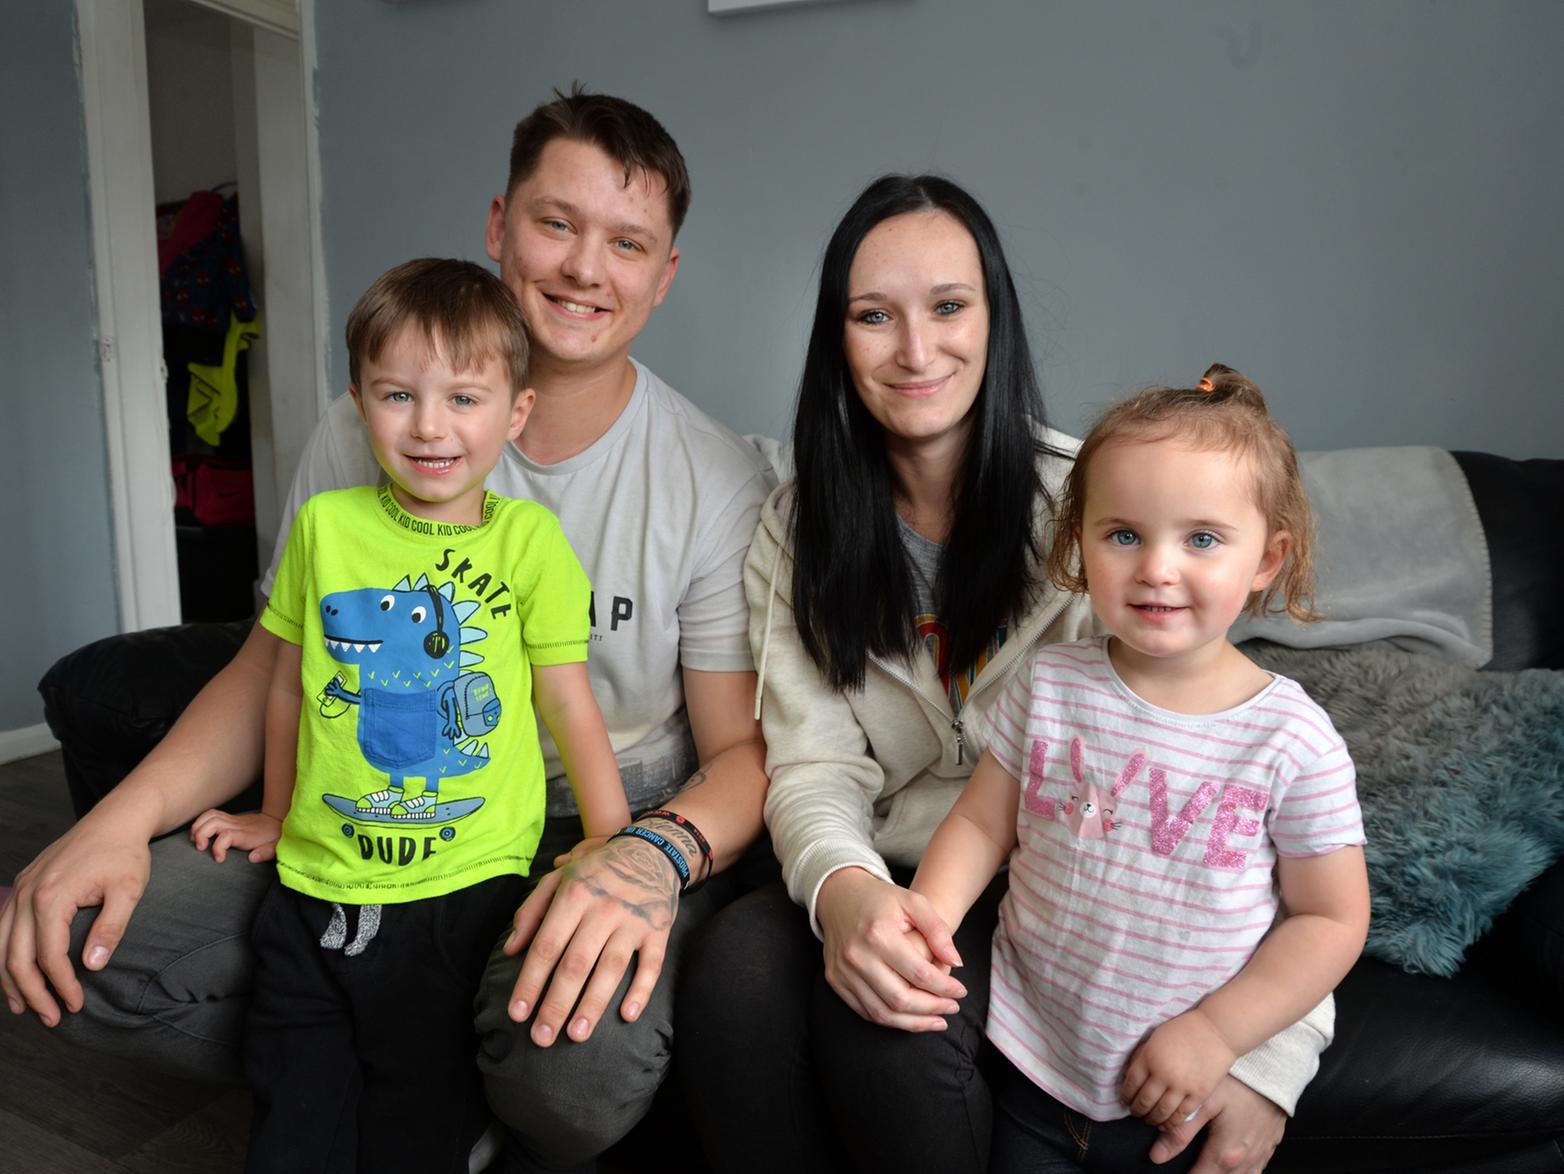 Friends and family of a mum re-diagnosed with cancer just months after being been given the all-clear have launched an urgent fundraising campaign to send her abroad for treatment.
Sam Broadbent, from Lutterworth, was told in April that an aggressive inoperable tumour had developed in her pelvic region.
She launched an appeal via a Crowdfunding site- https://www.justgiving.com/crowdfunding/becca-sutton-supportingsam